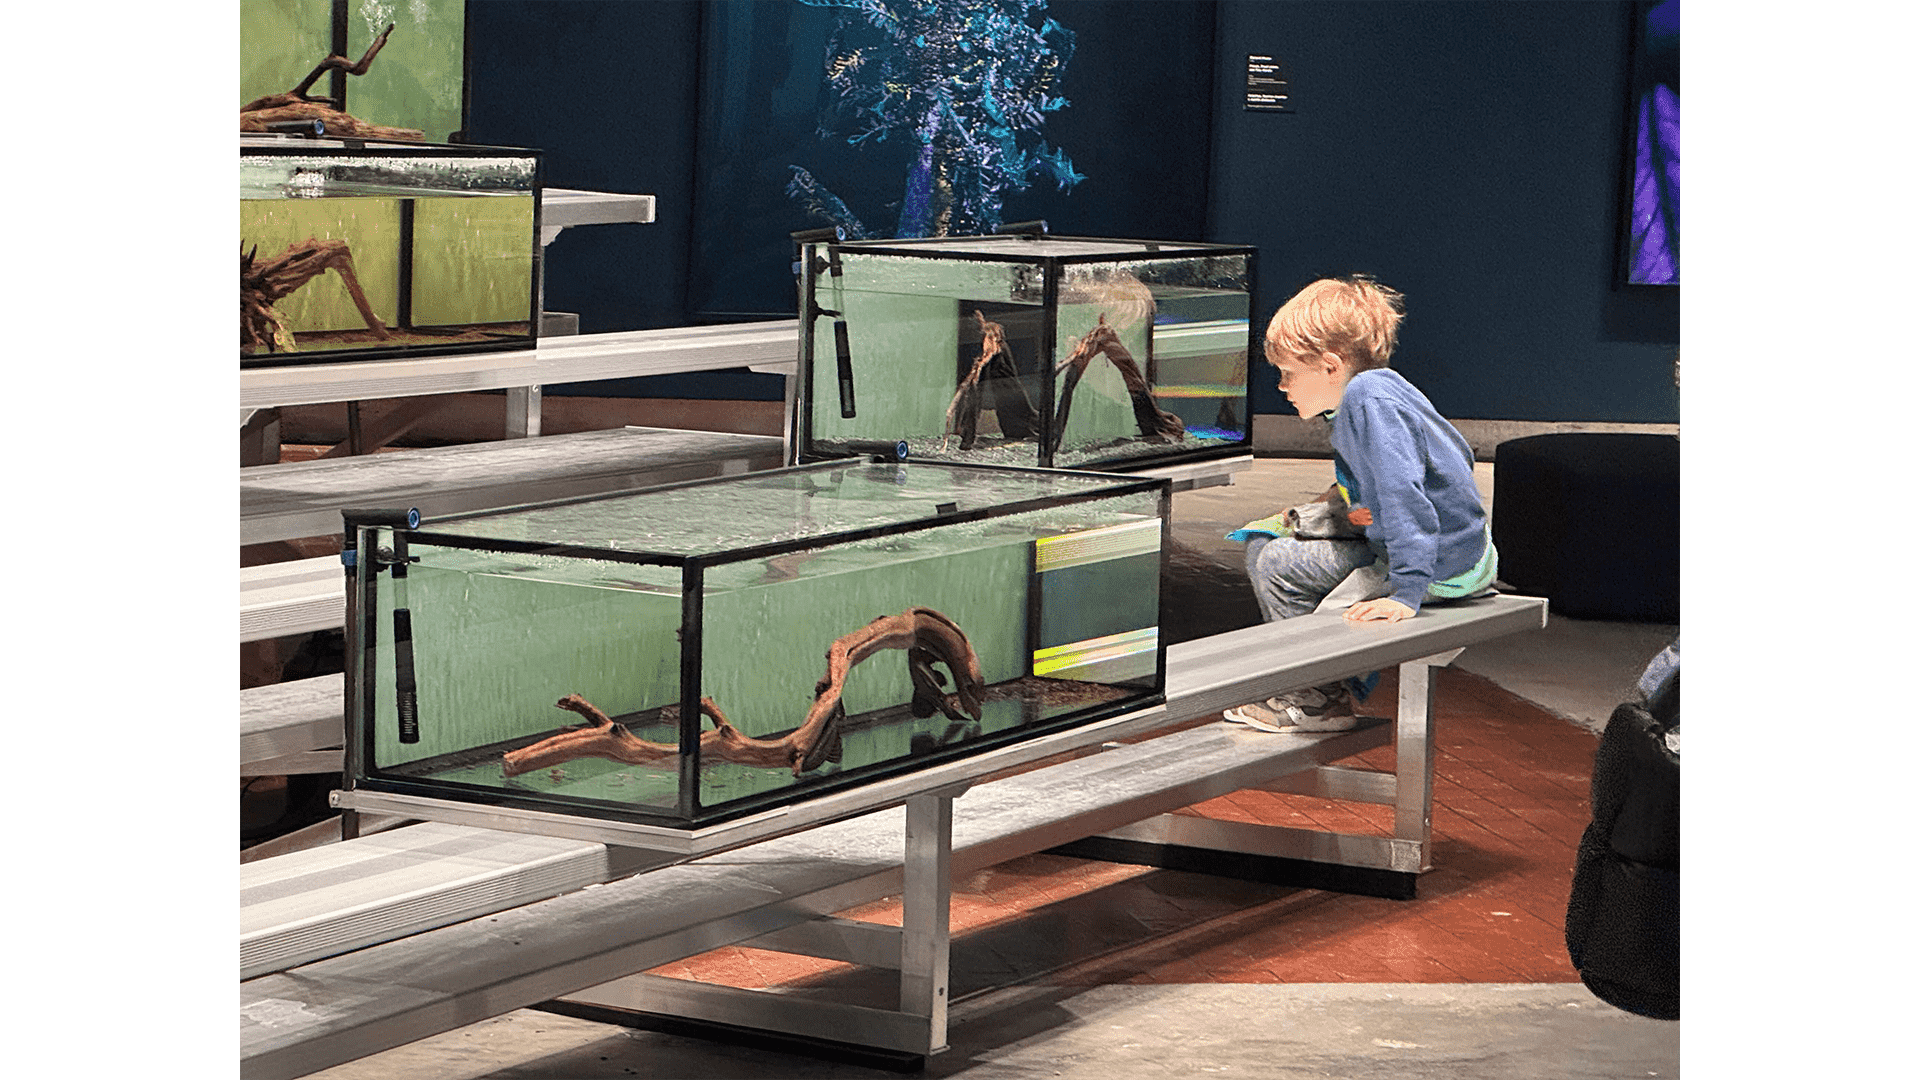 A boy peers into one of the aquaria of <i>Lonely Loricariidae</i>, an art installation featured in the 2023/24 Enduring Amazon exhibition at the Crystal Bridges Museum of American Art in Bentonville, Arkansas.